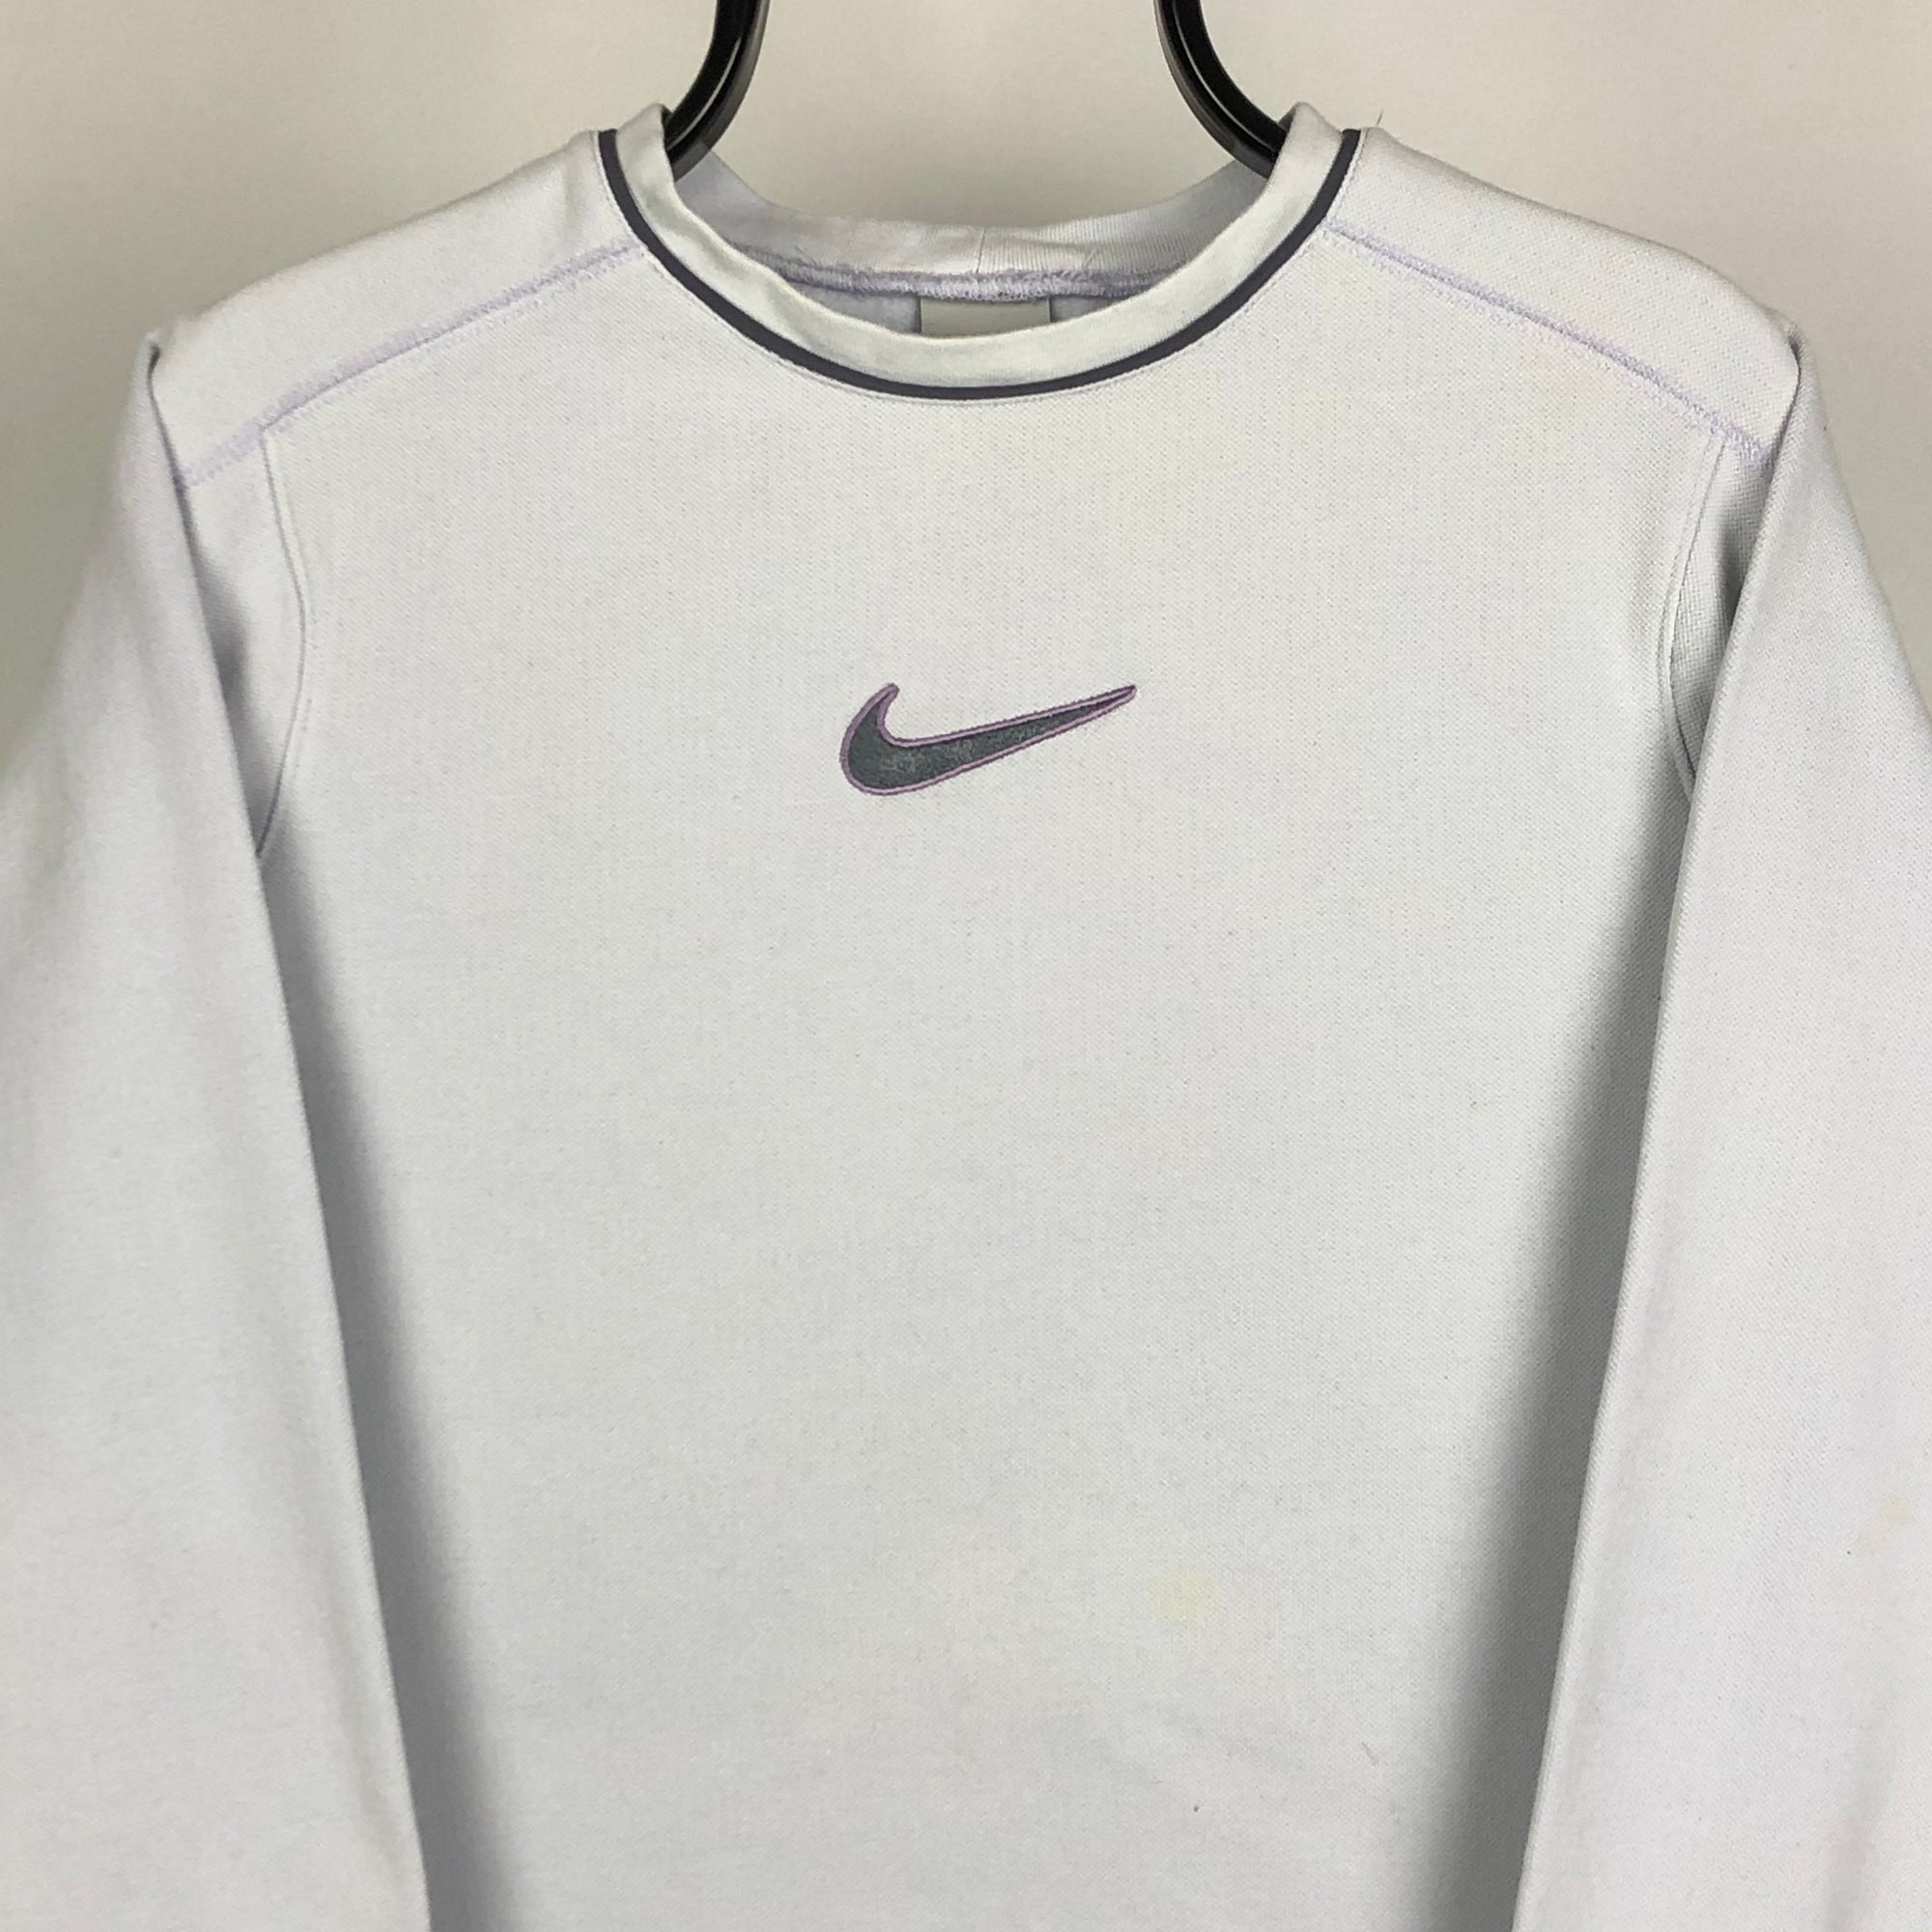 Vintage Nike Embroidered Centre Swoosh Sweatshirt in Lilac - Men's XS/Women's Small